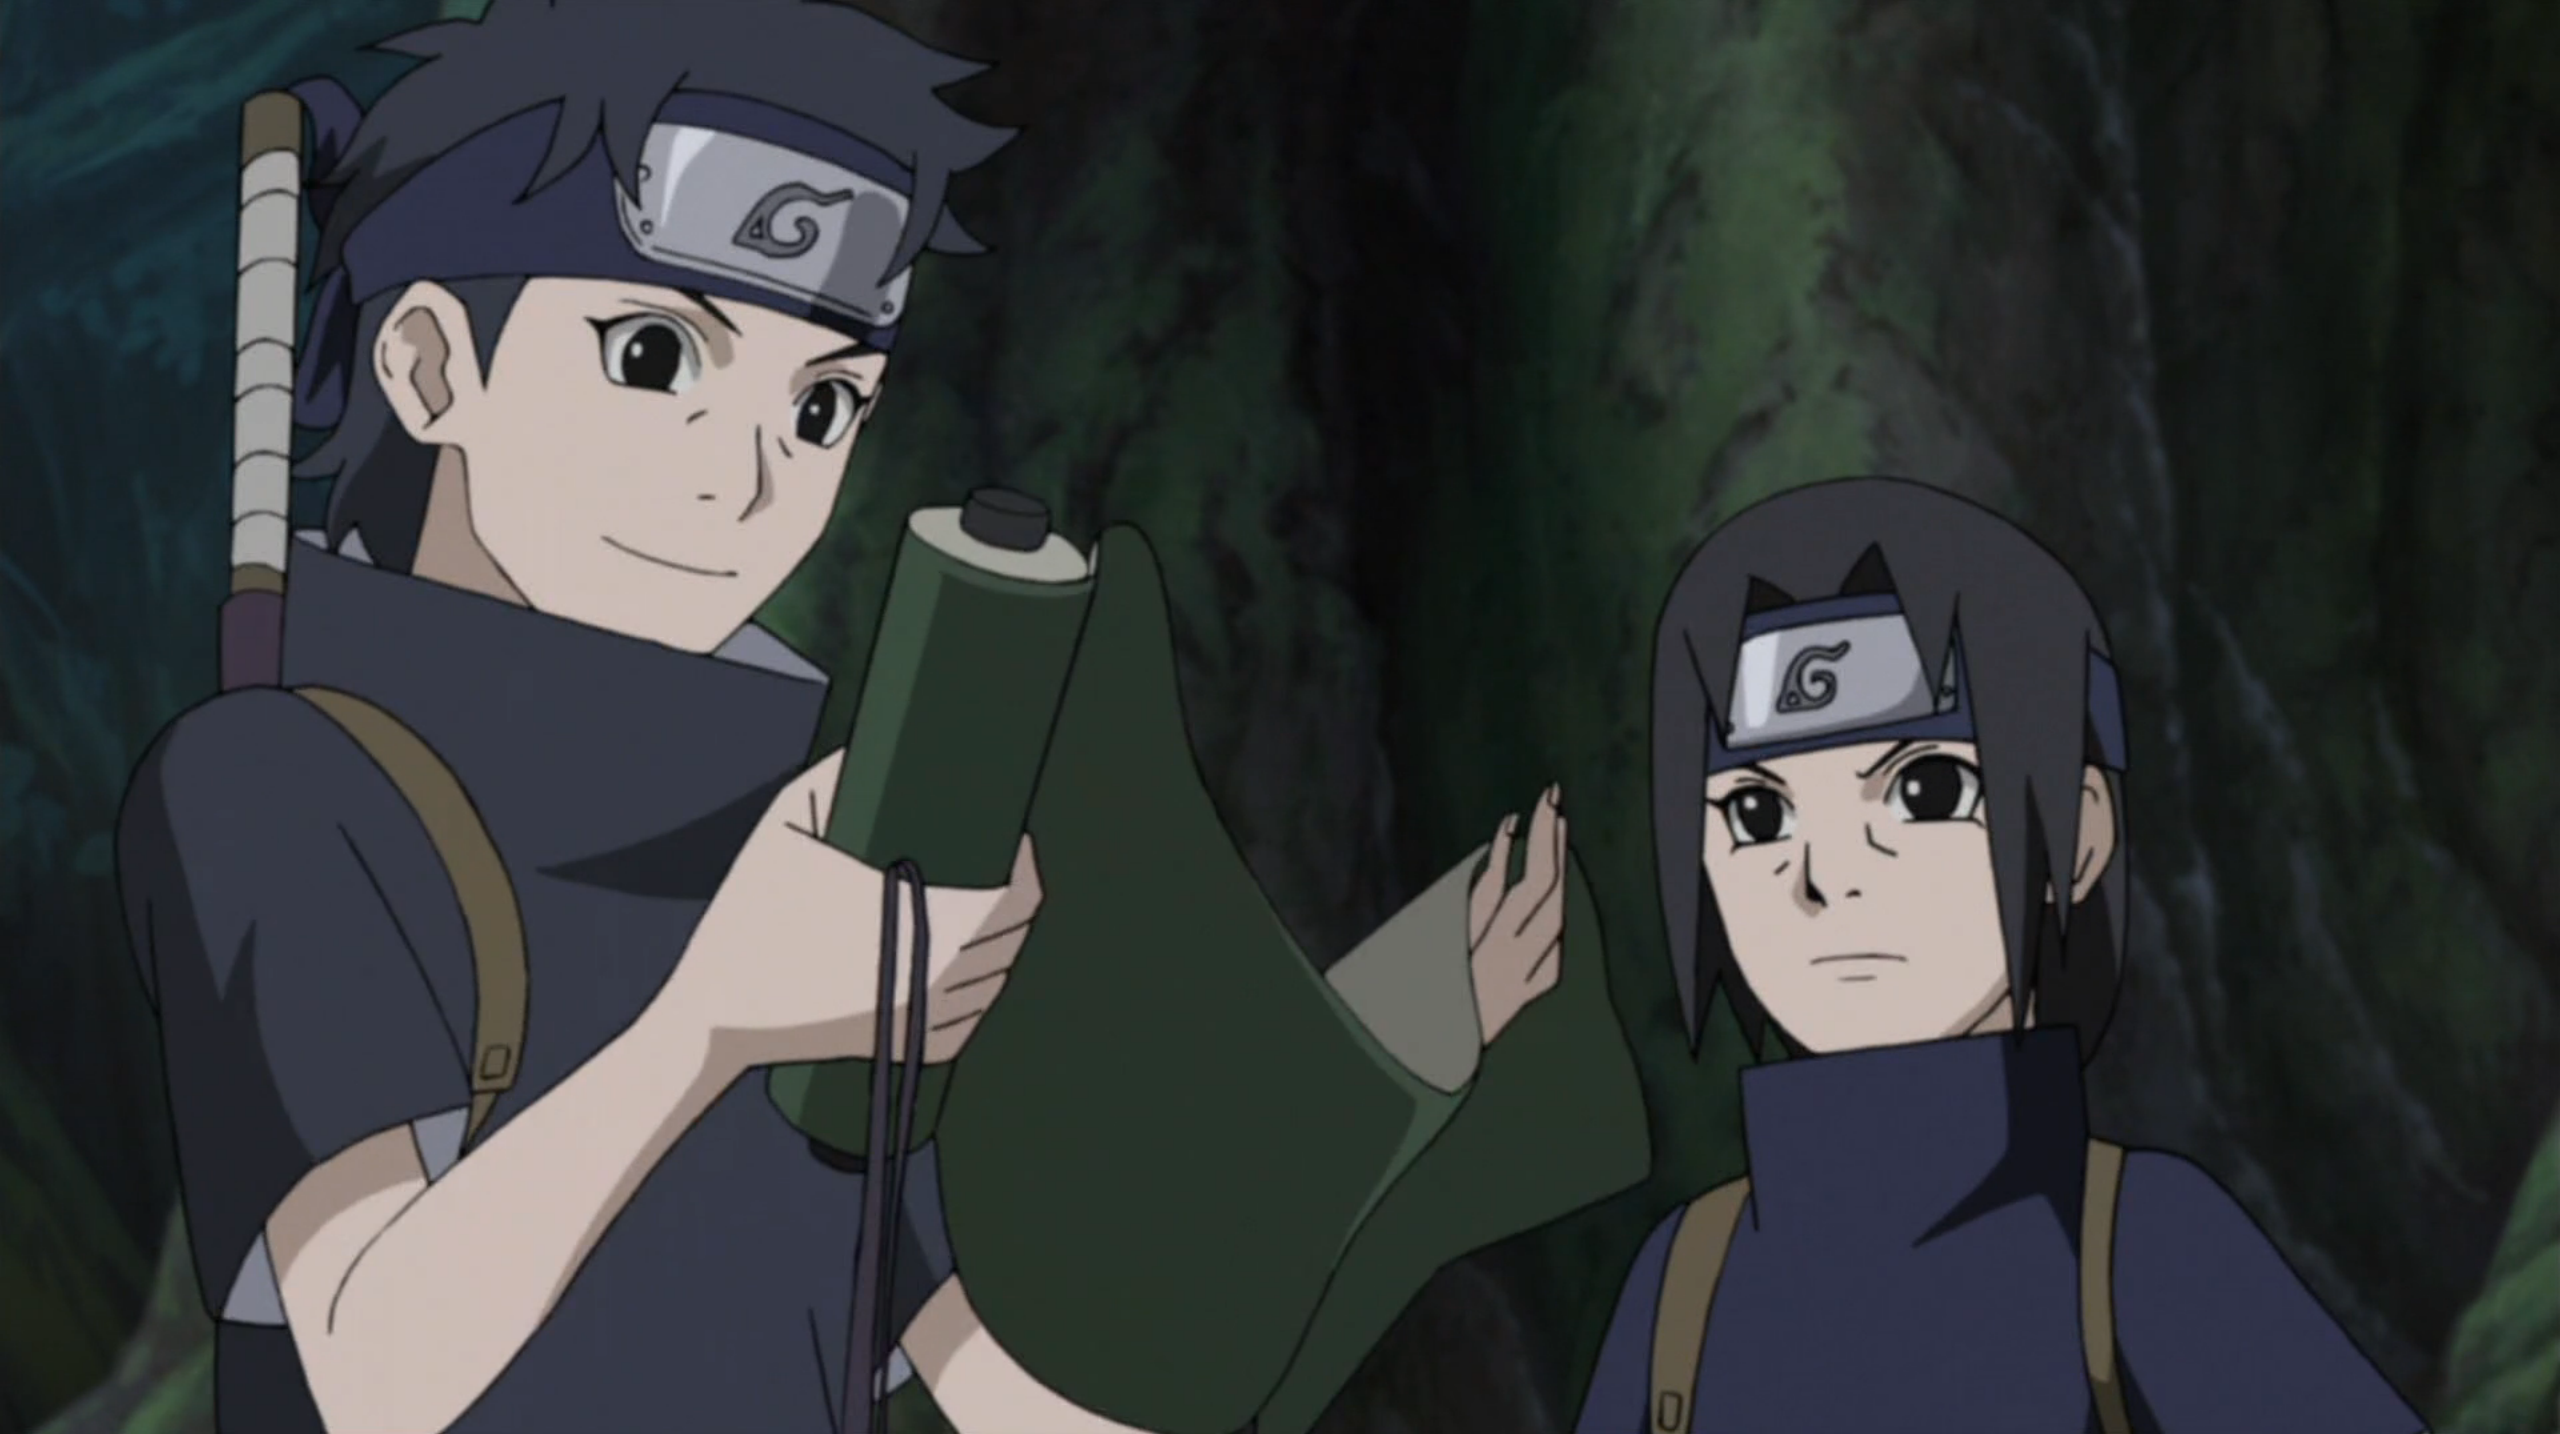 Who's the person inbetween itachi and shisui?